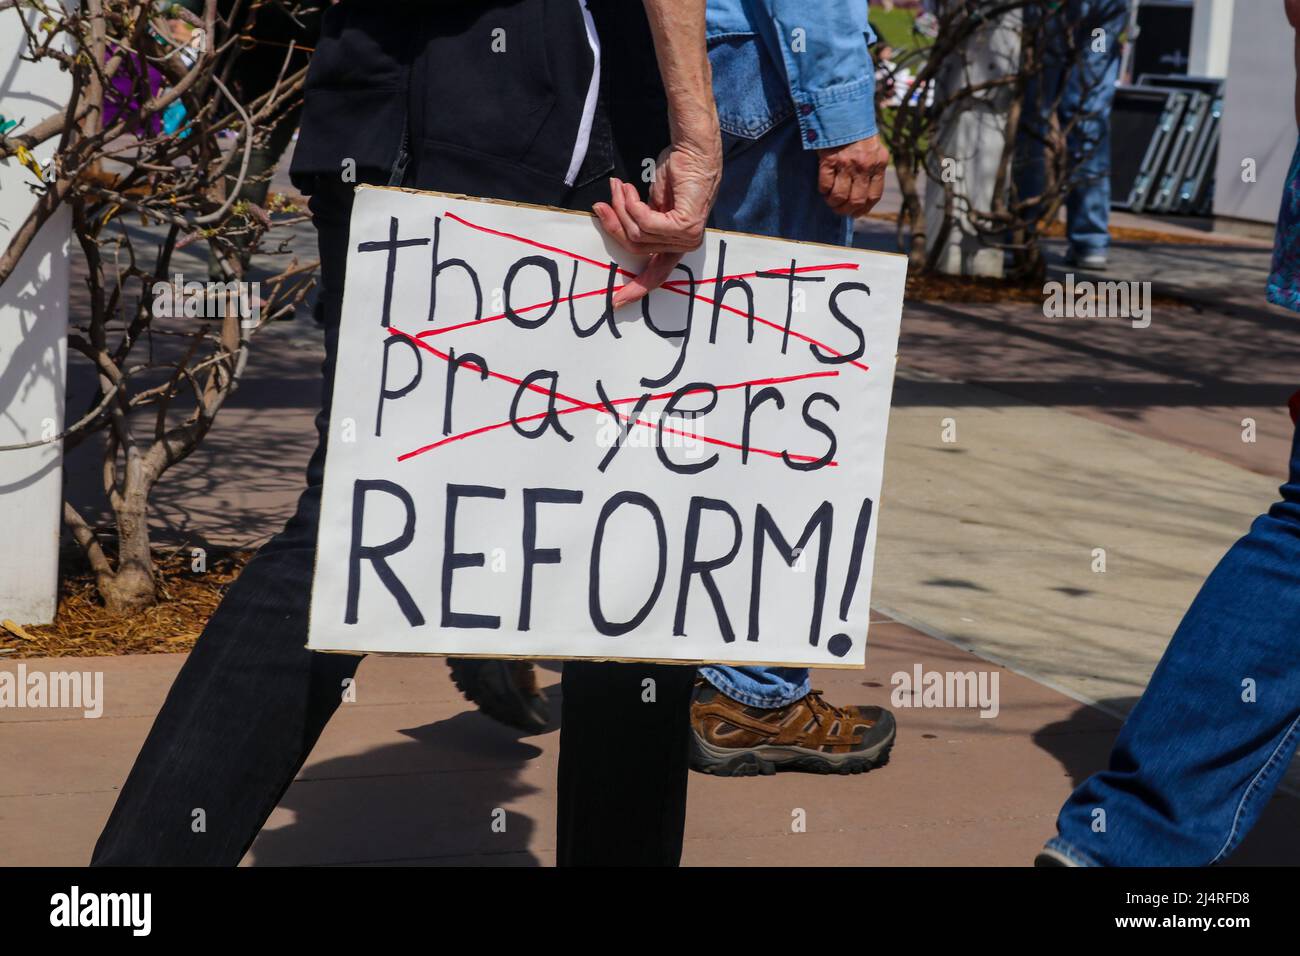 Protest sign held by participants at March for Our Lives rally Stock Photo